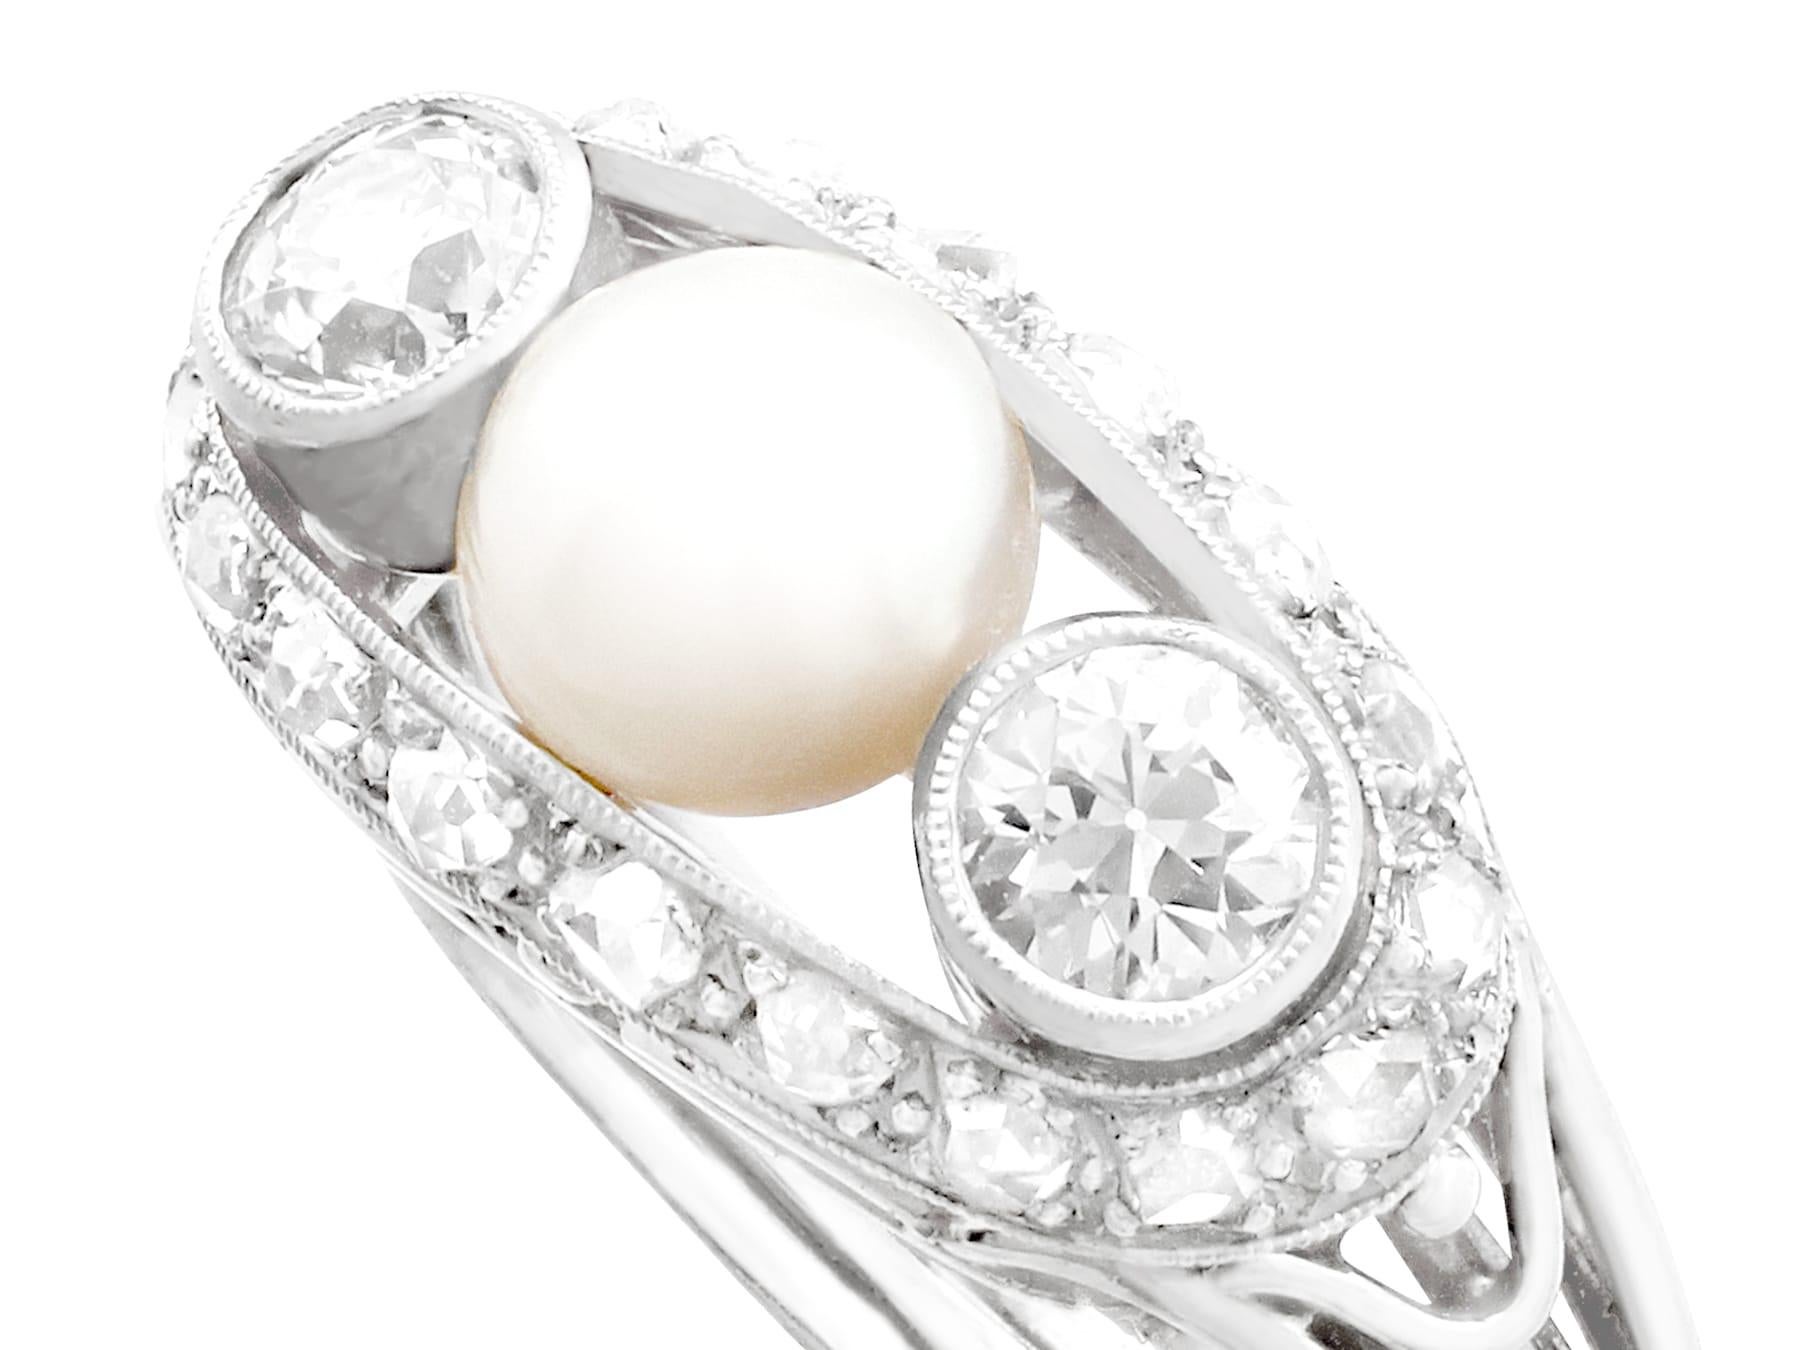 A stunning, fine and impressive antique pearl and 0.78 carat diamond, 14 karat white gold cocktail ring; part of our antique jewelry and estate jewelry collections.

This stunning antique pearl and diamond ring has been crafted in 14k white